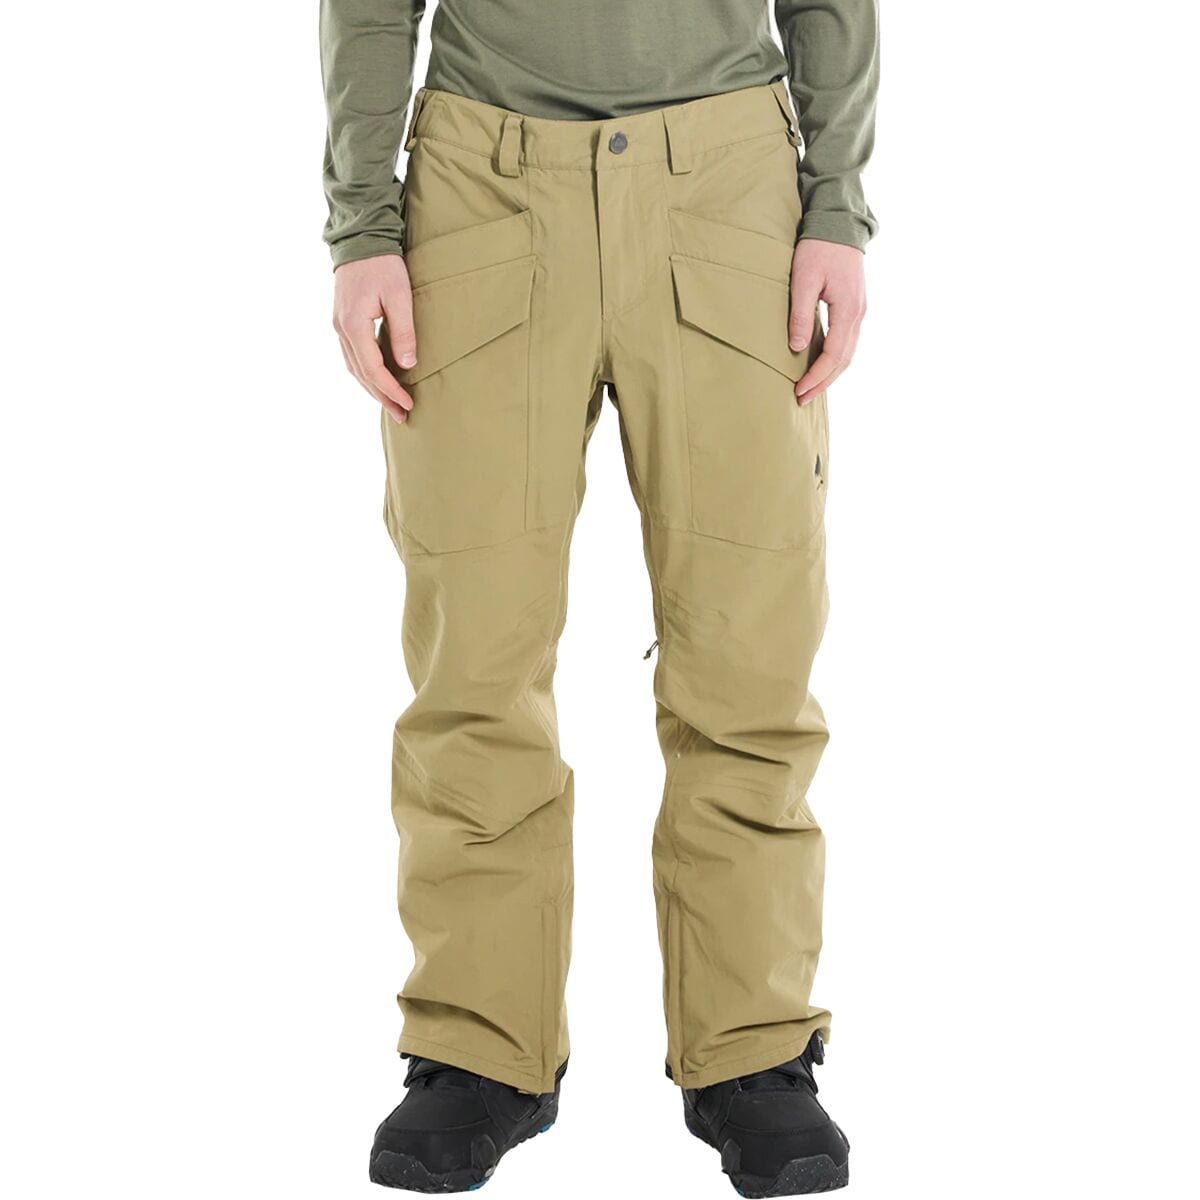 Covert 2.0 Insulated Pant - Men